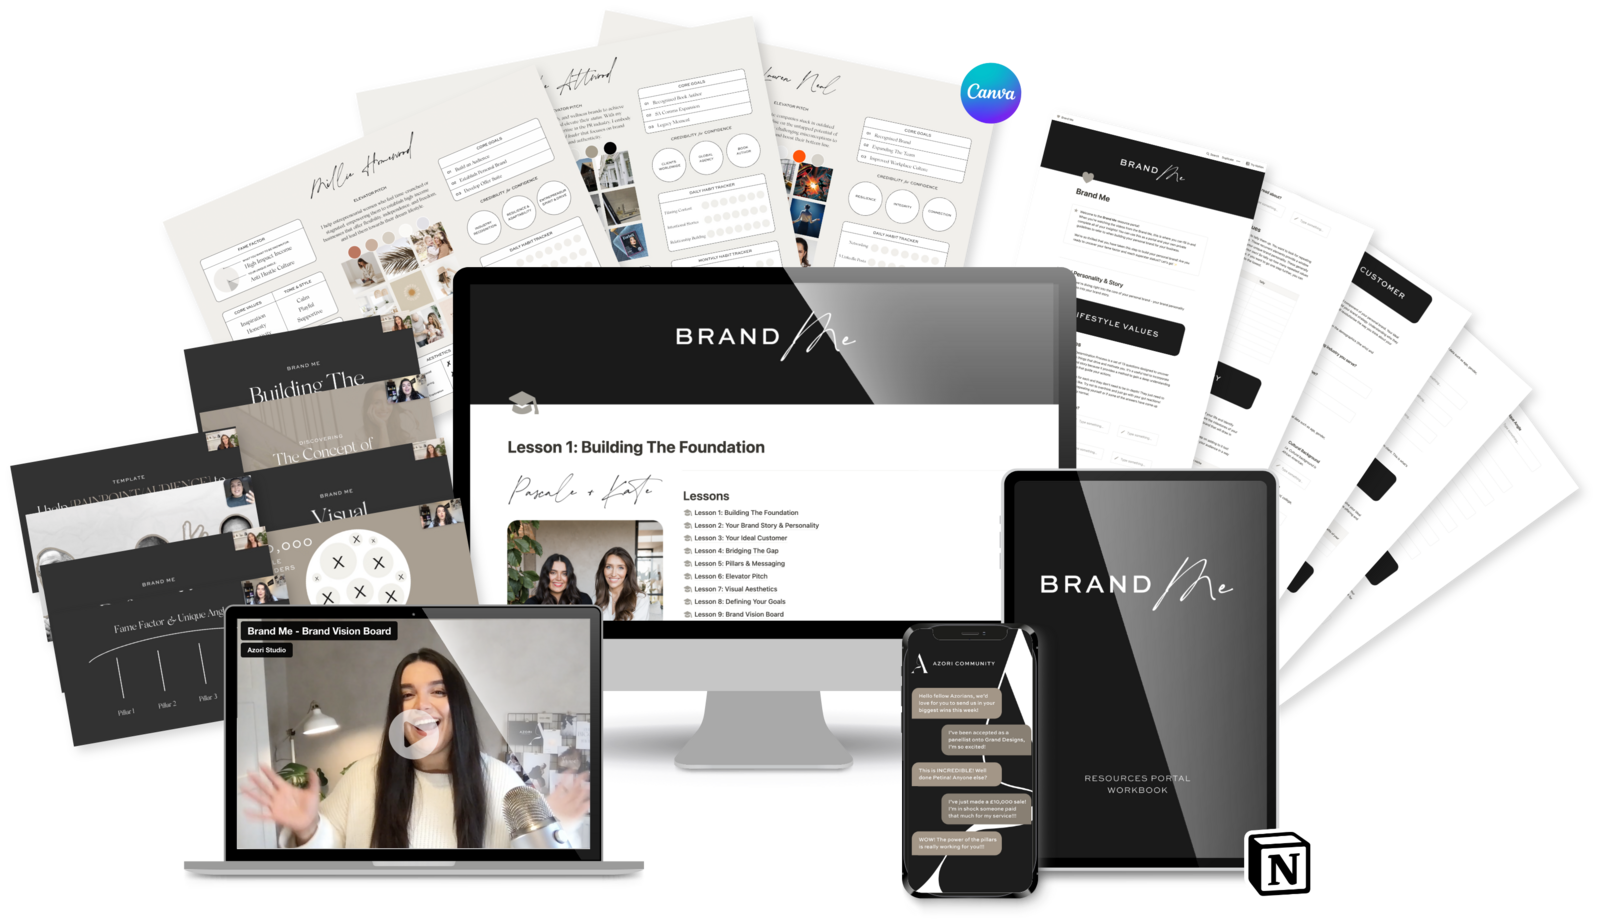 Brand Me - Personal Branding Course